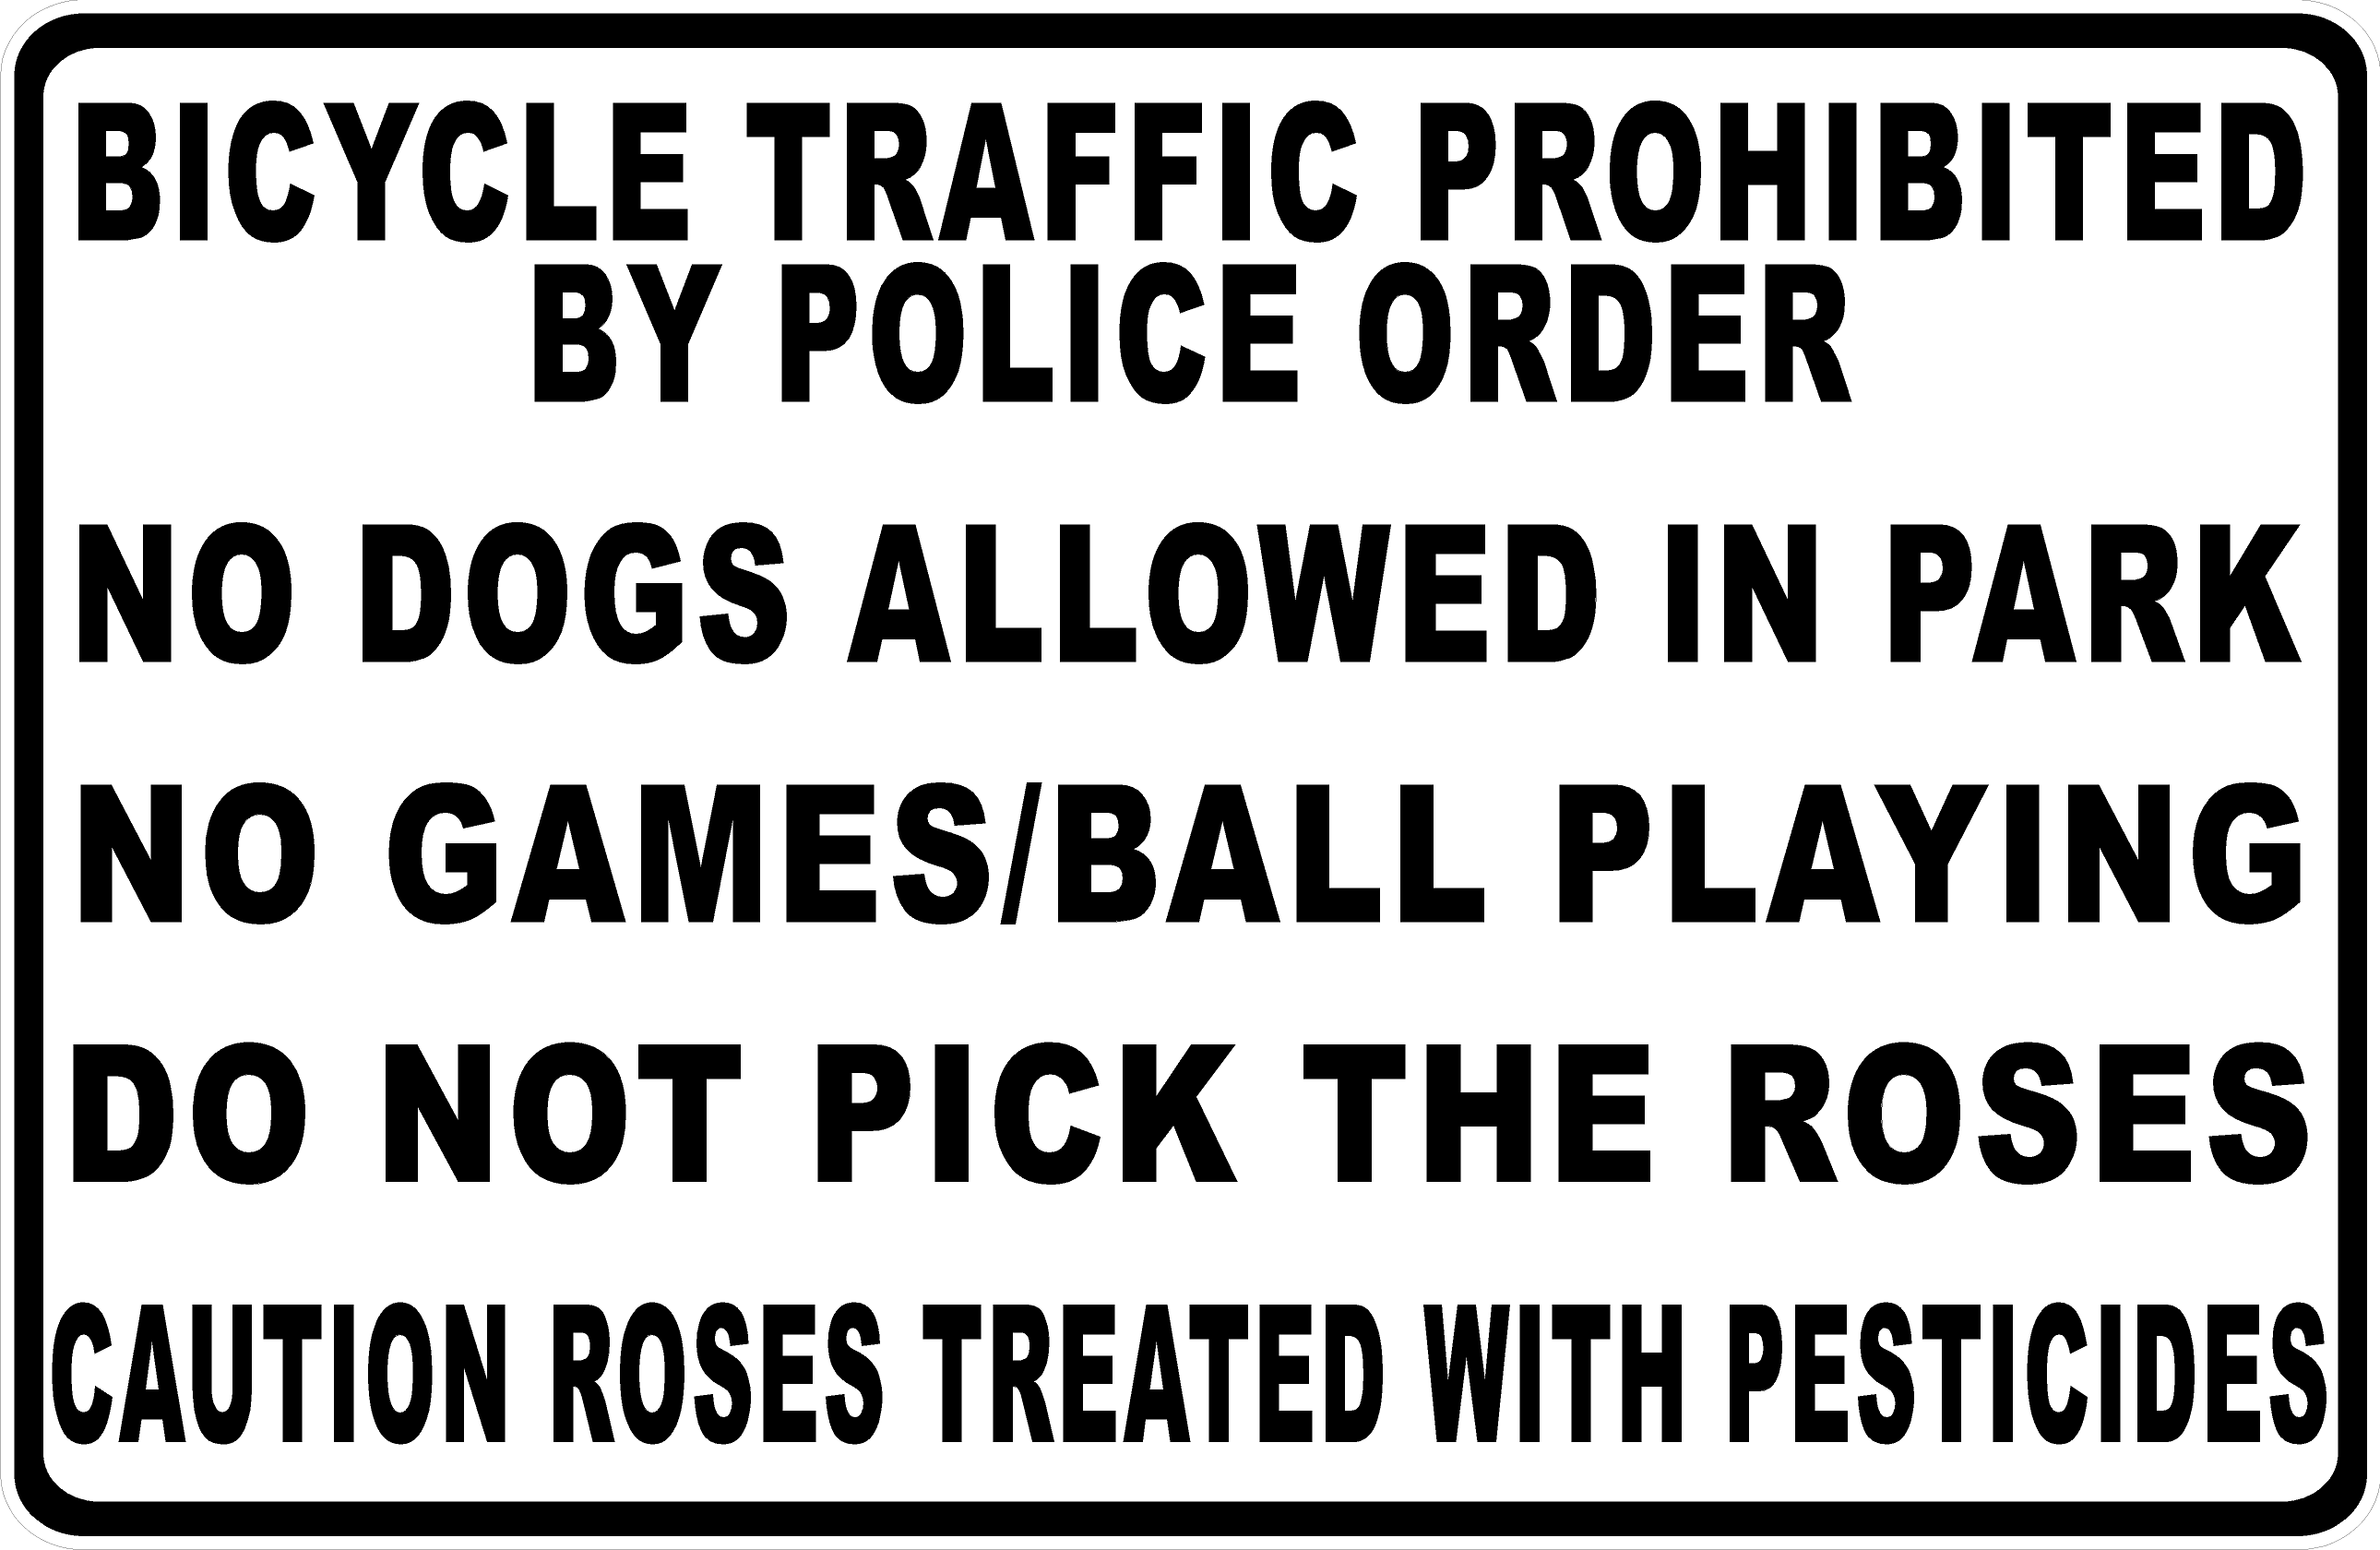 Park Rules Bicycle Traffic Prohibited No Dogs Allowed No Ball Playing